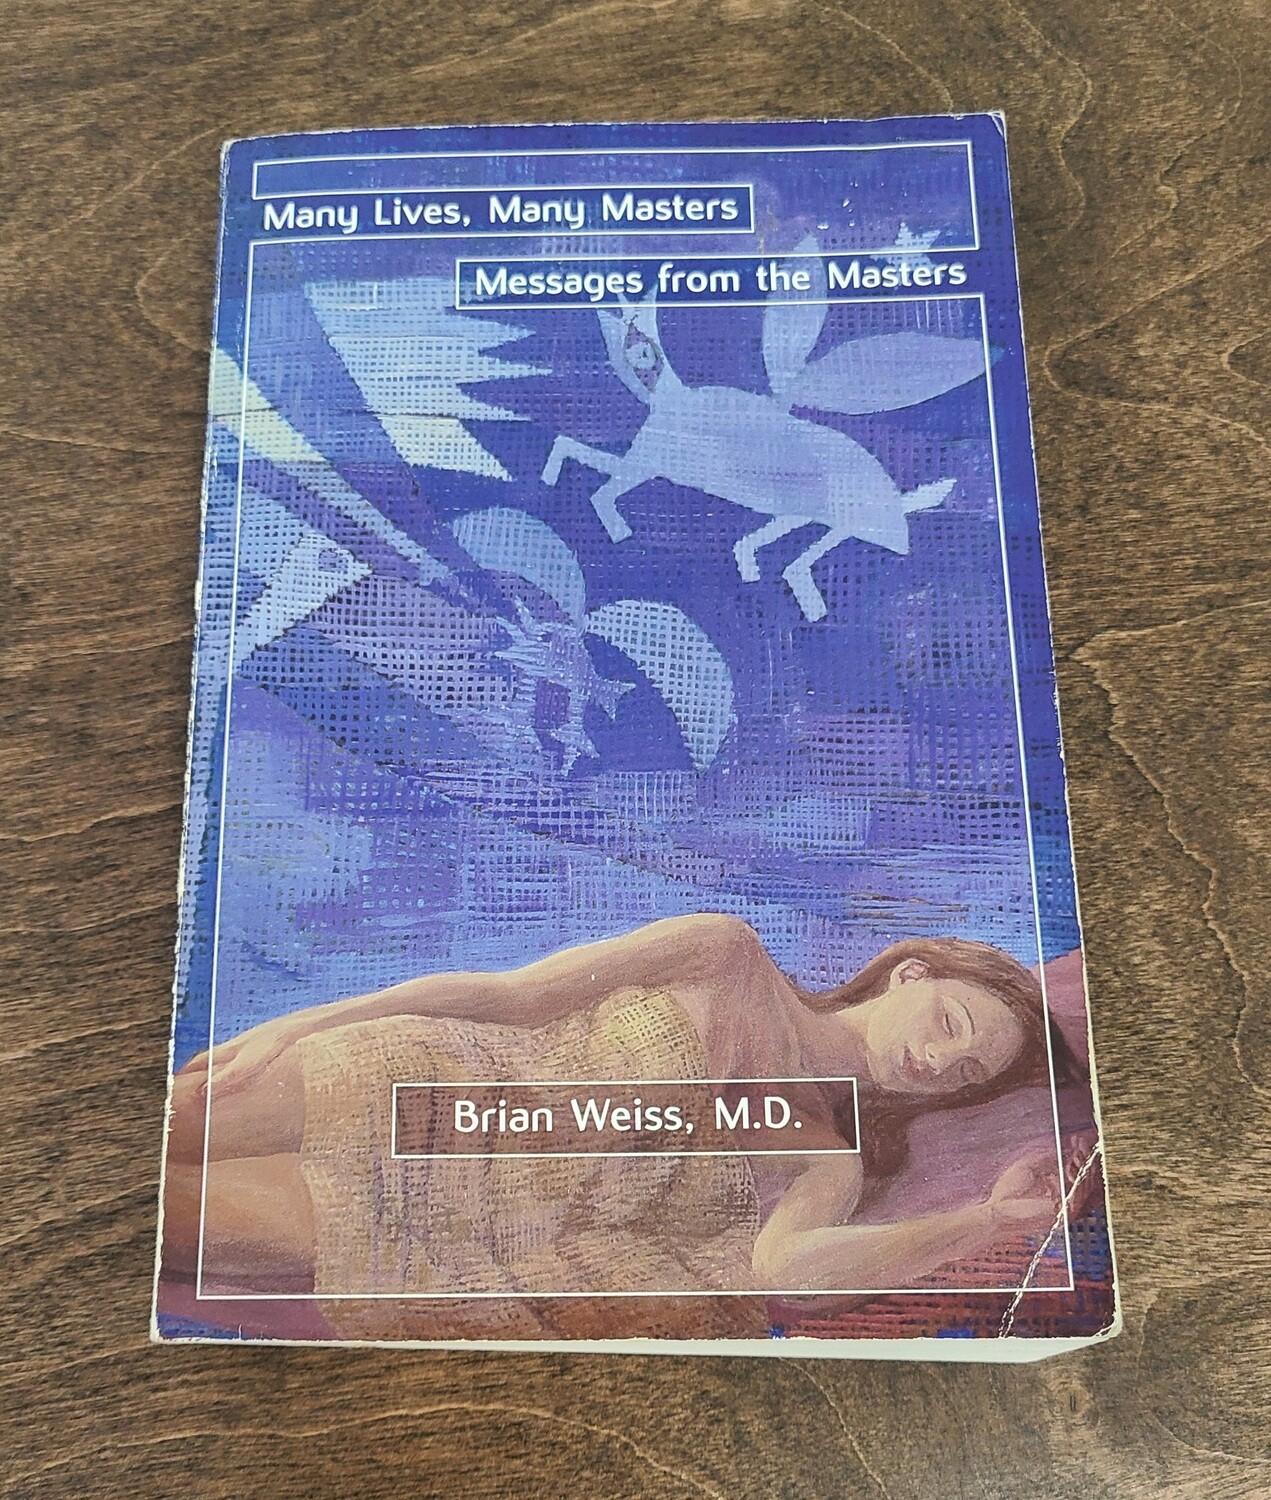 Many Lives, Many Masters and Messages from the Masters by Brian Weiss, M.D.